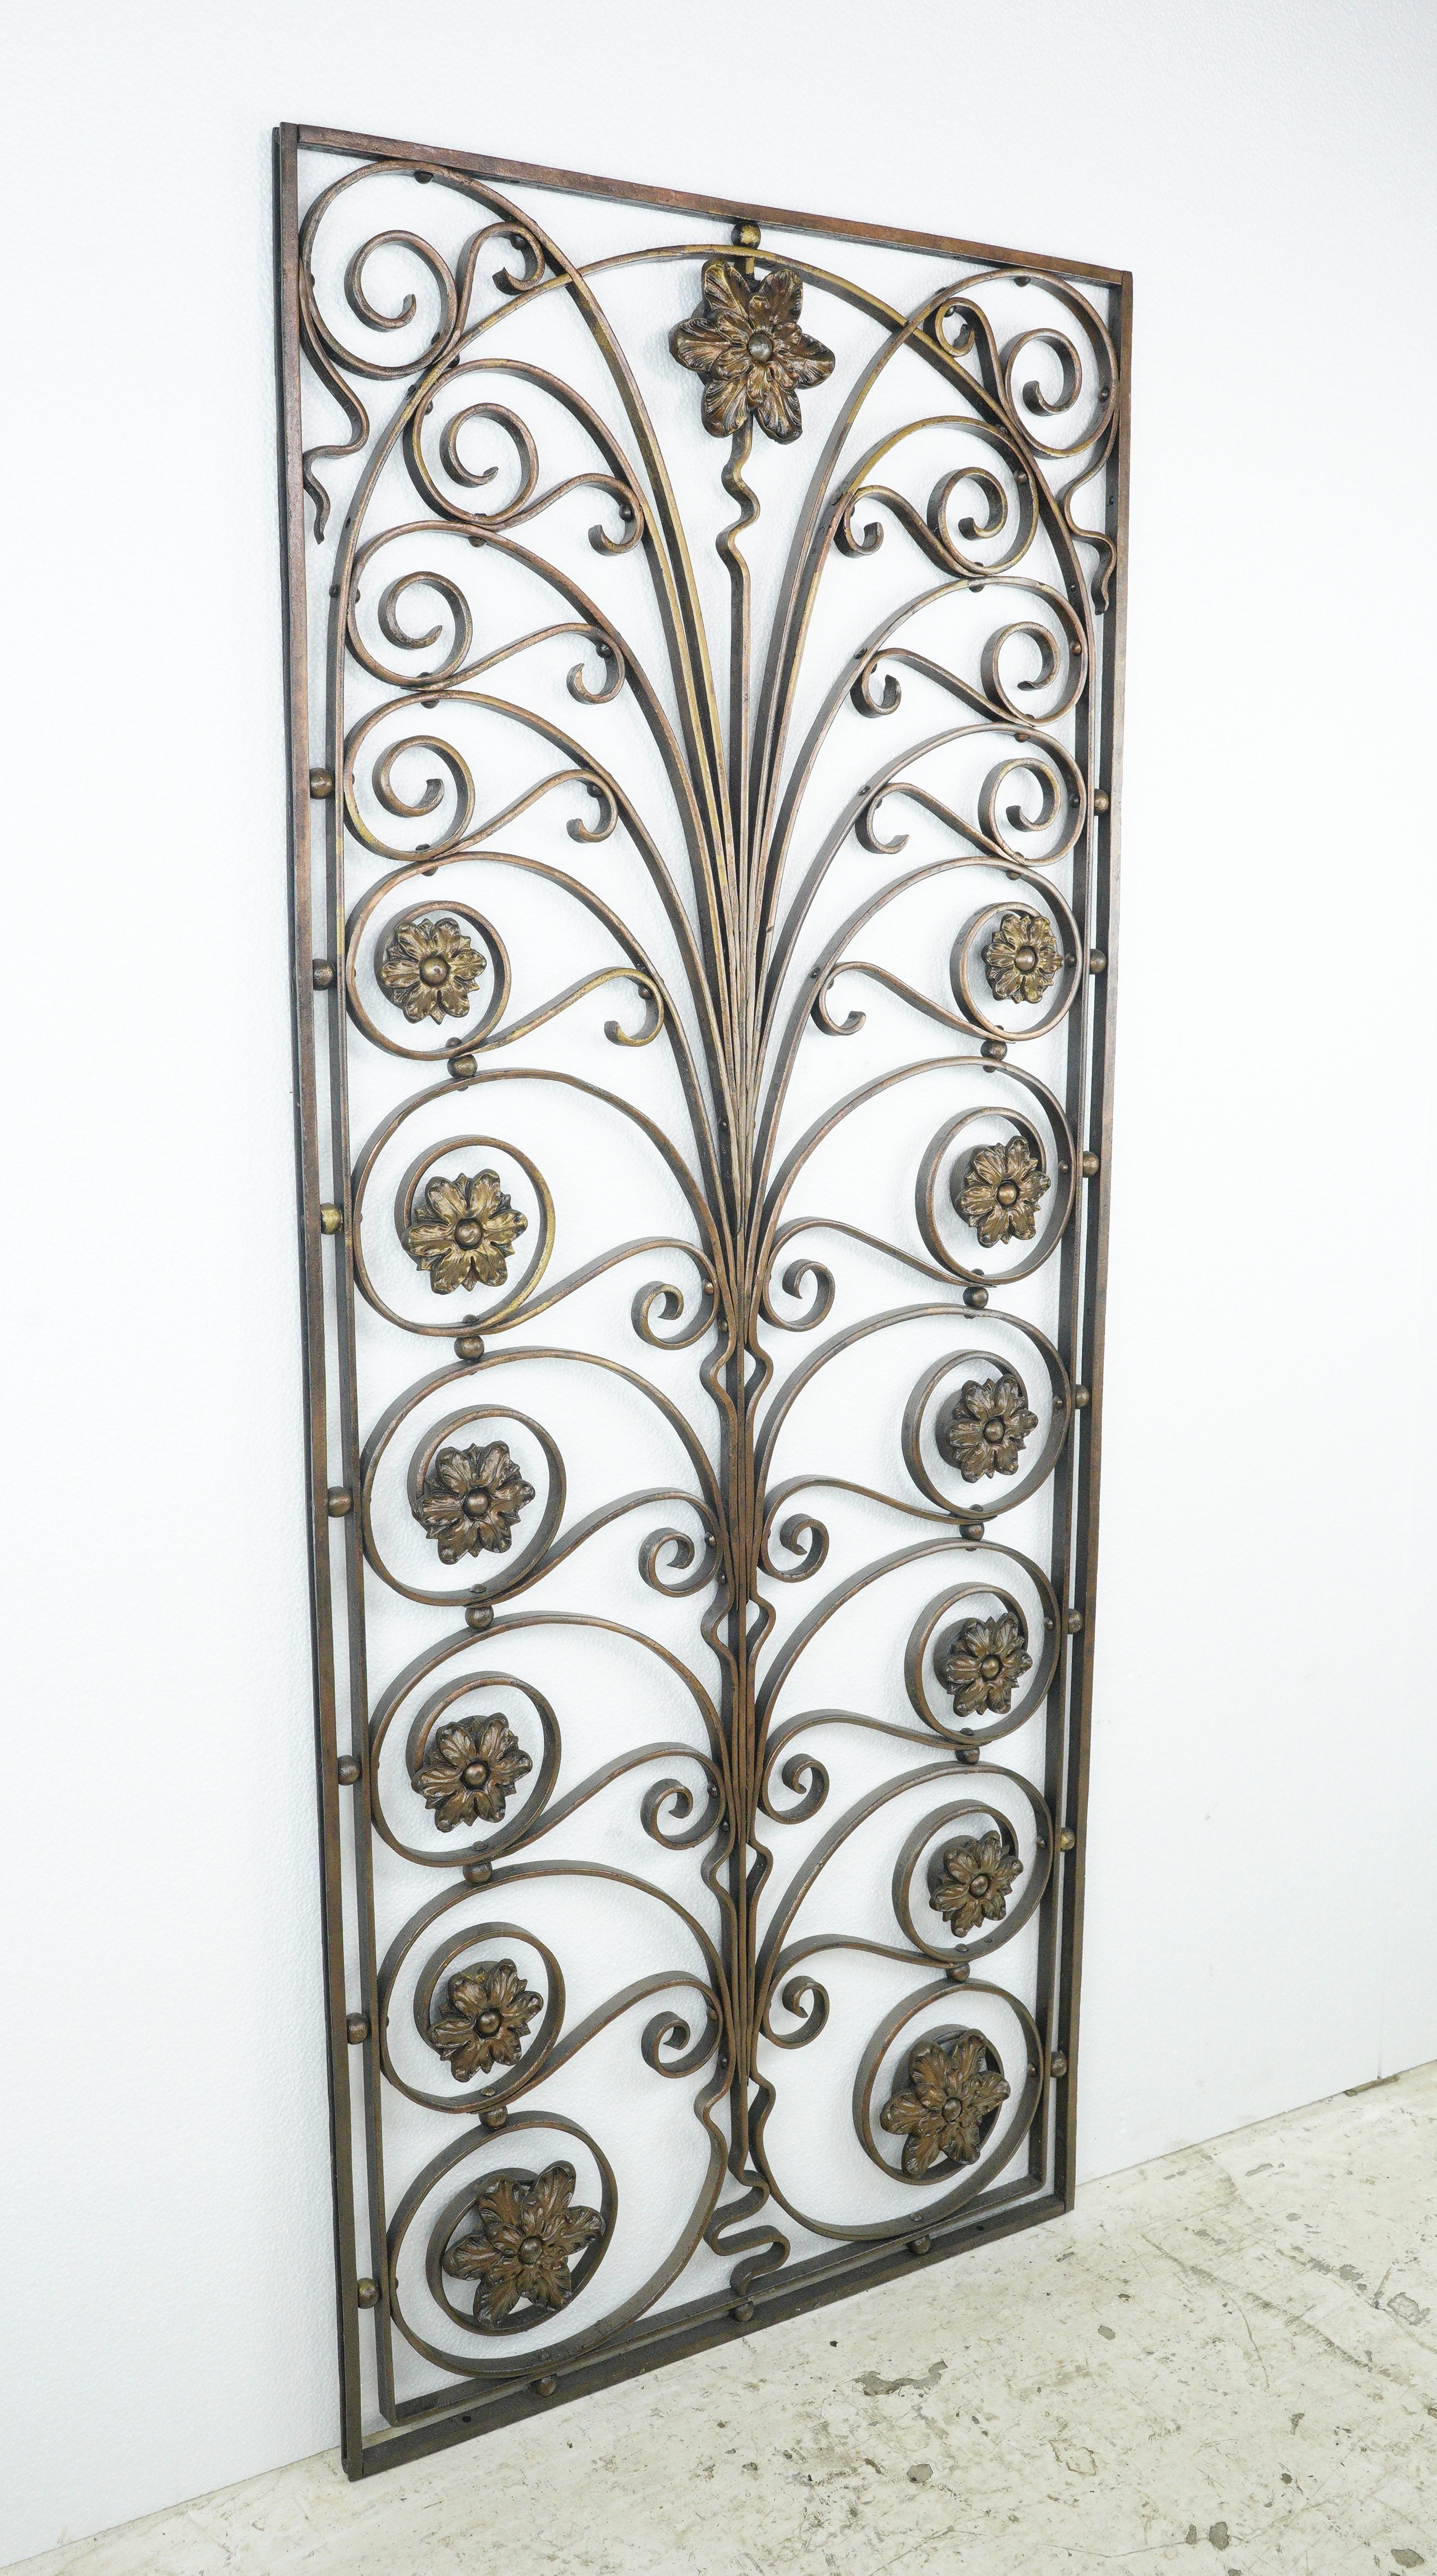 Antique wrought iron swirl and floral wrought iron window guard from the United Charities Building formerly located at 287 Park Avenue South. Designed by R. H. Robertson of Rowe & Baker fame, the United Charities Building was built in 1893 in the